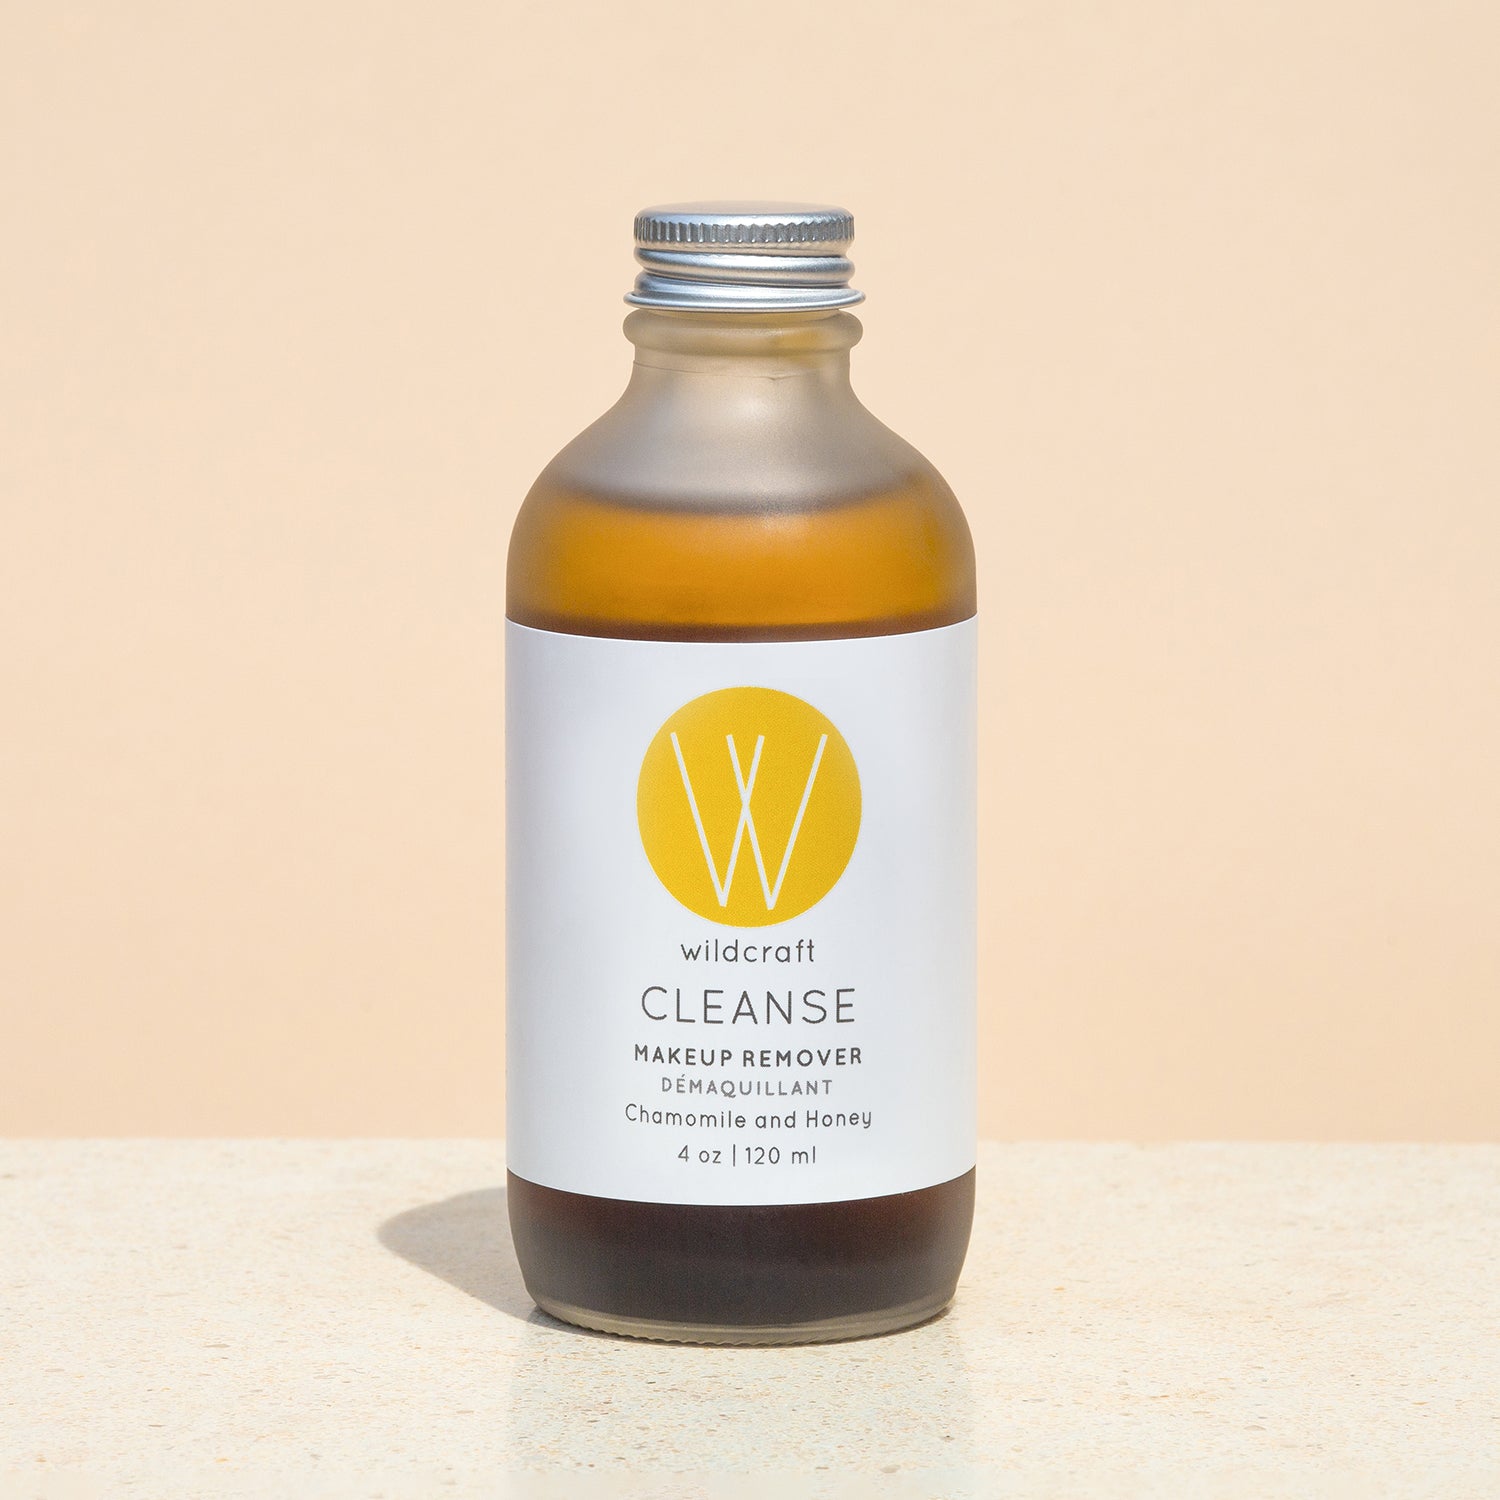 Cleanse Makeup Remover bottle on a simple background